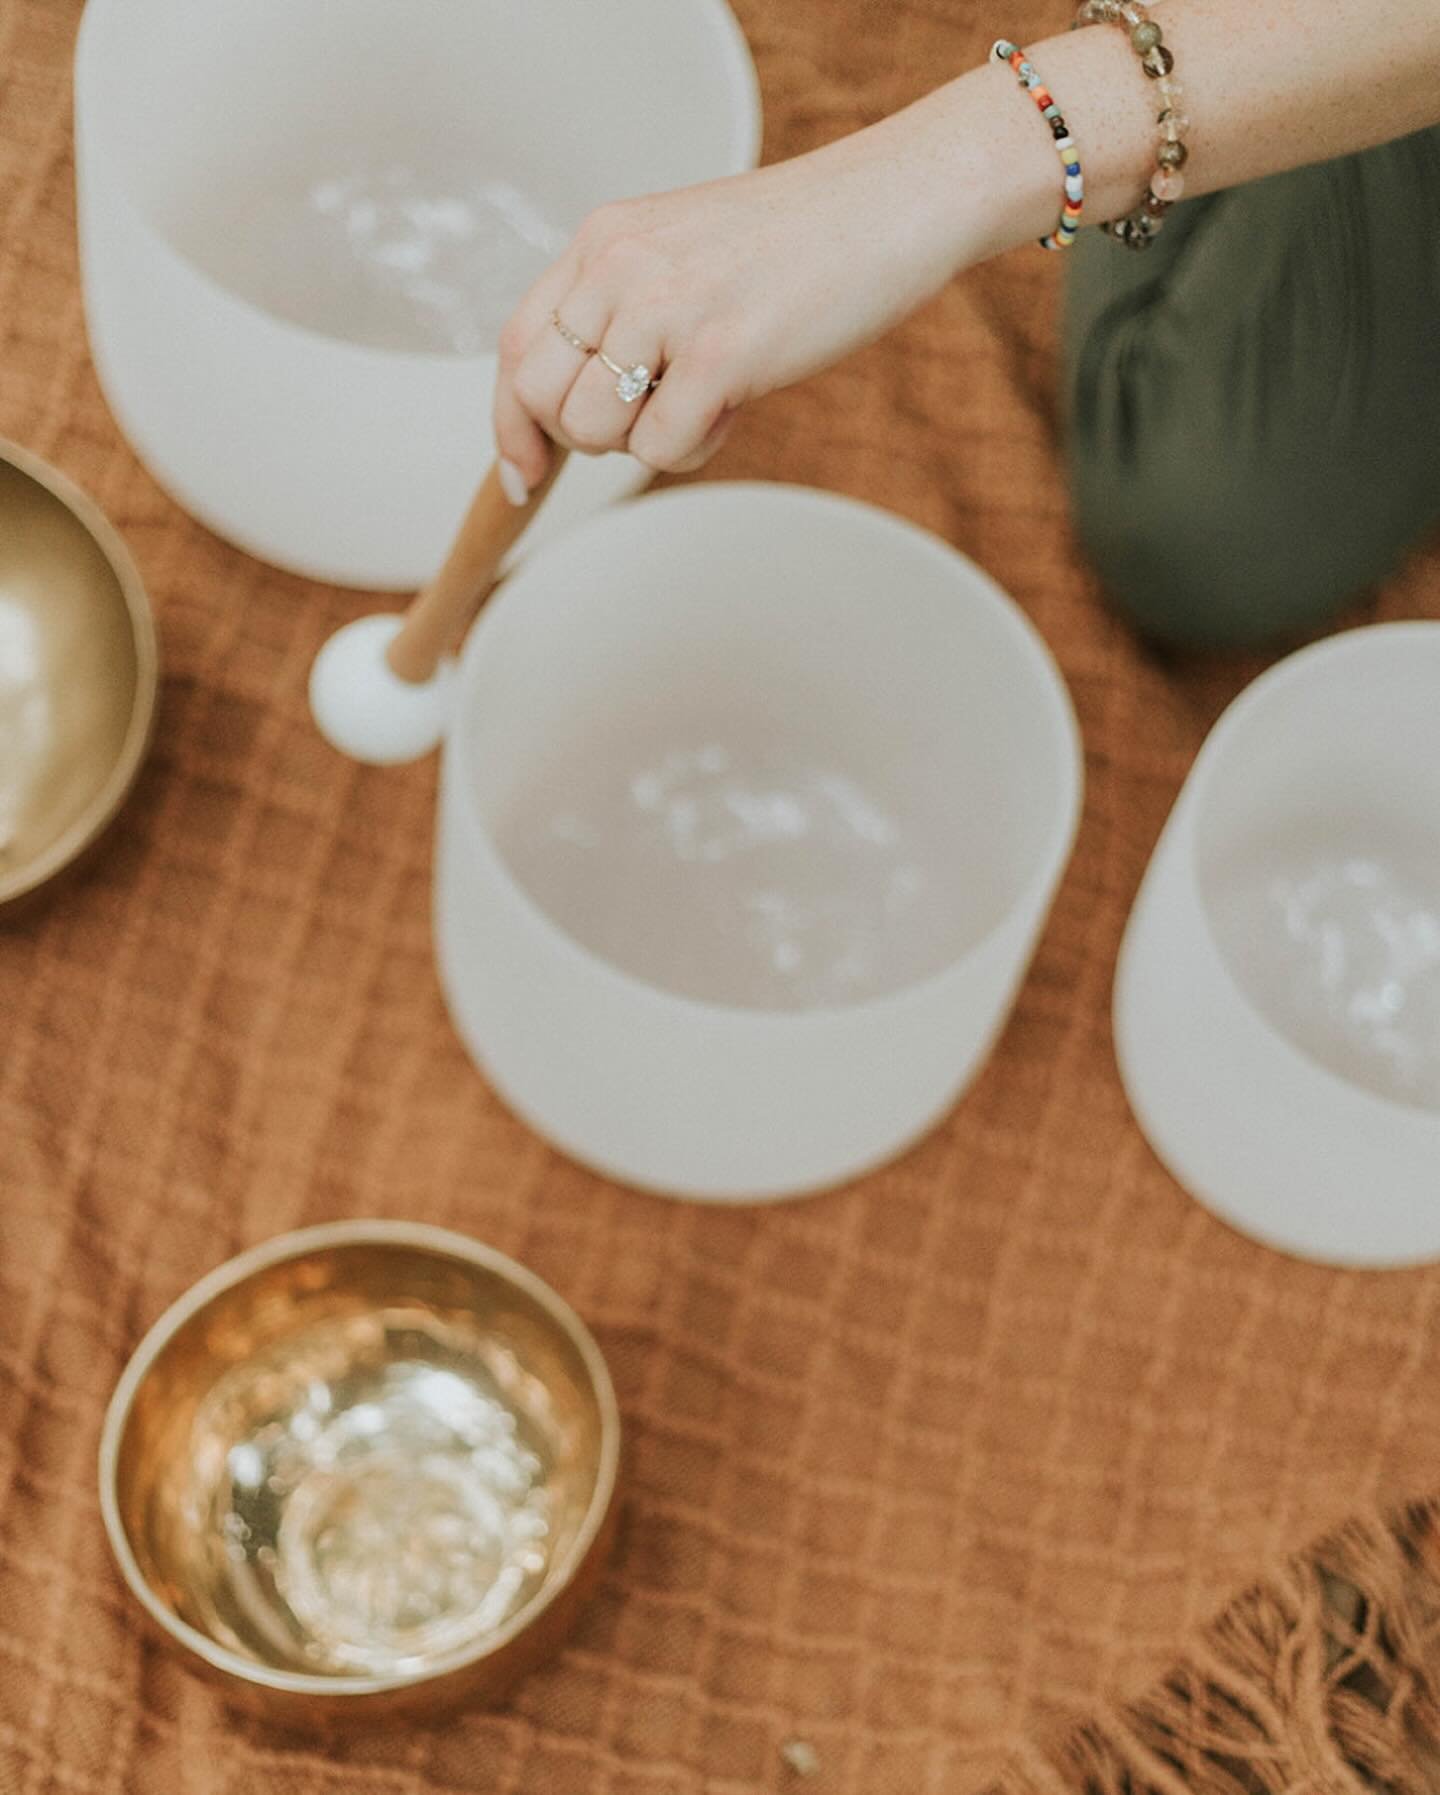 Some extra pretty shots of @magnoliahealingsounds doing her thing with her singing bowls 🎶 &hearts;️ Sound baths are the definition of vibing higher and I&rsquo;m totally here for it. What&rsquo;s your favorite way to meditate?